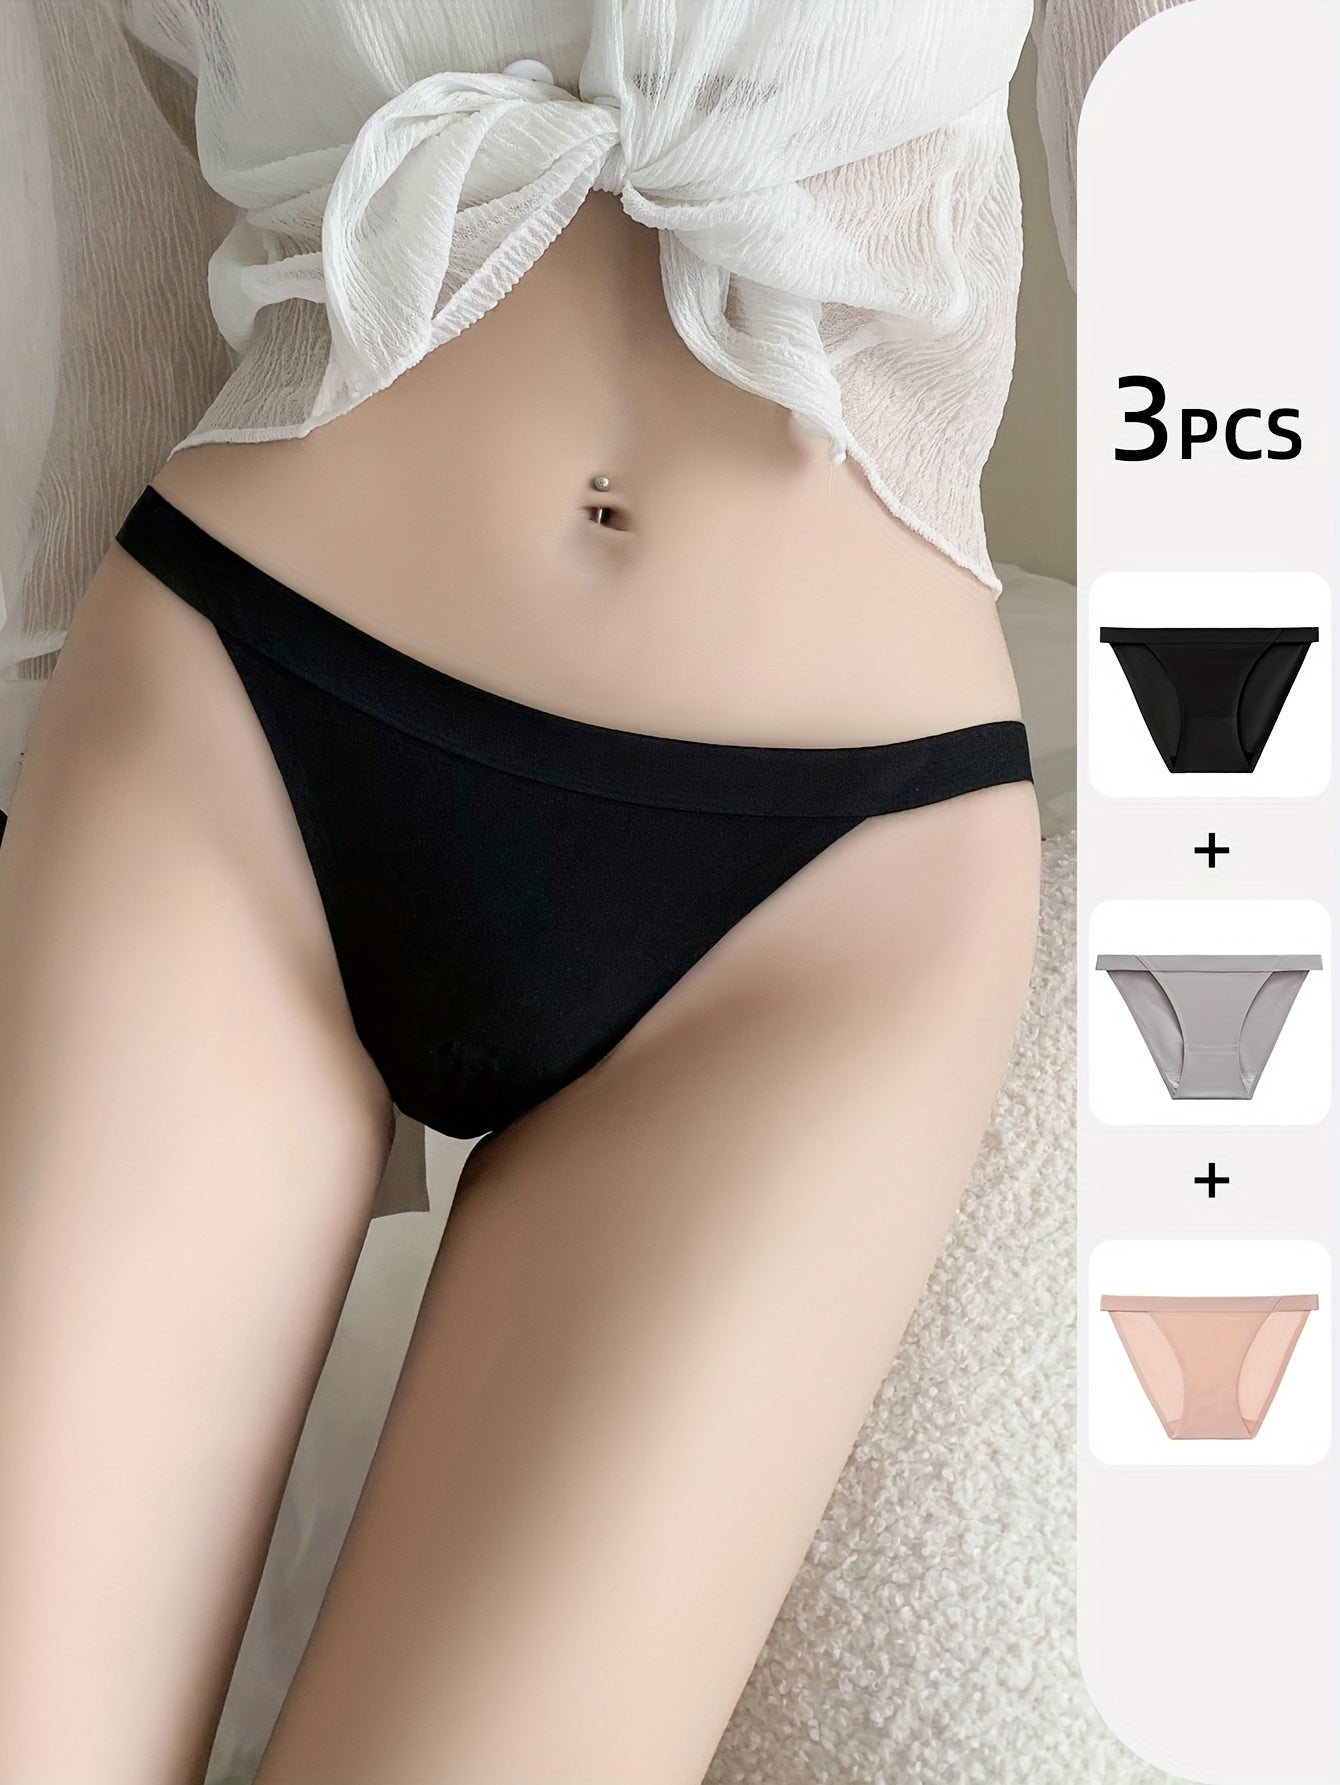 3pcs Seamless Solid Briefs, Comfy & Breathable Stretchy Intimates Panties, Women's Lingerie & Underwear